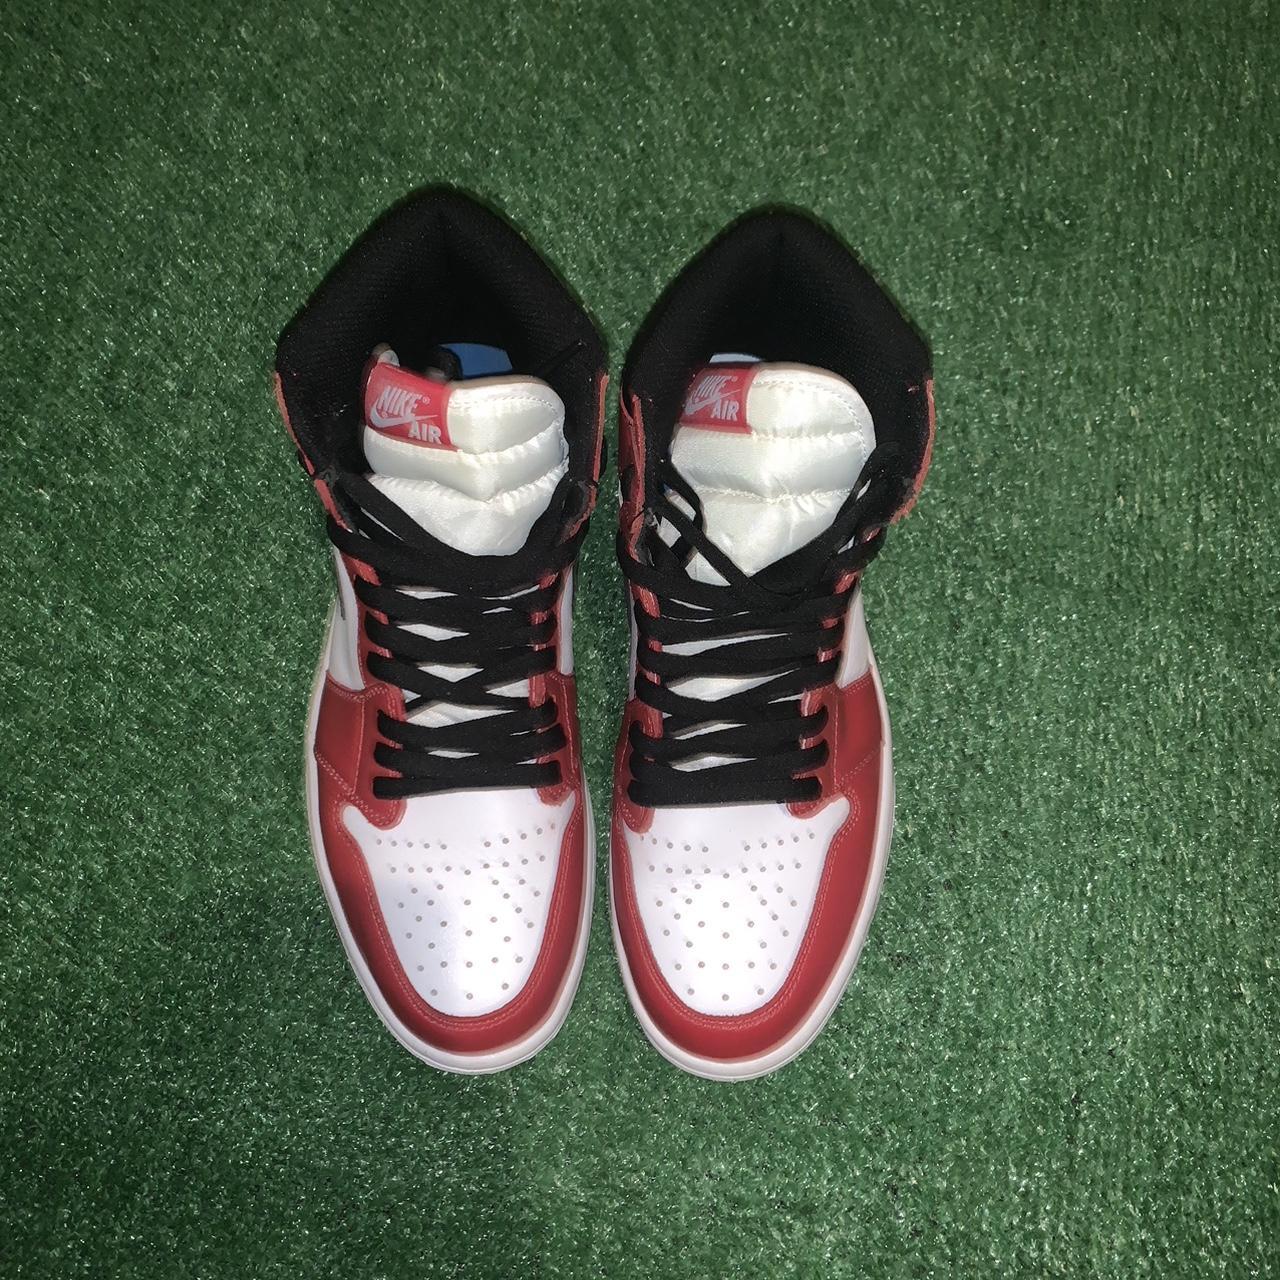 Jordan Men's Red and White Trainers (3)